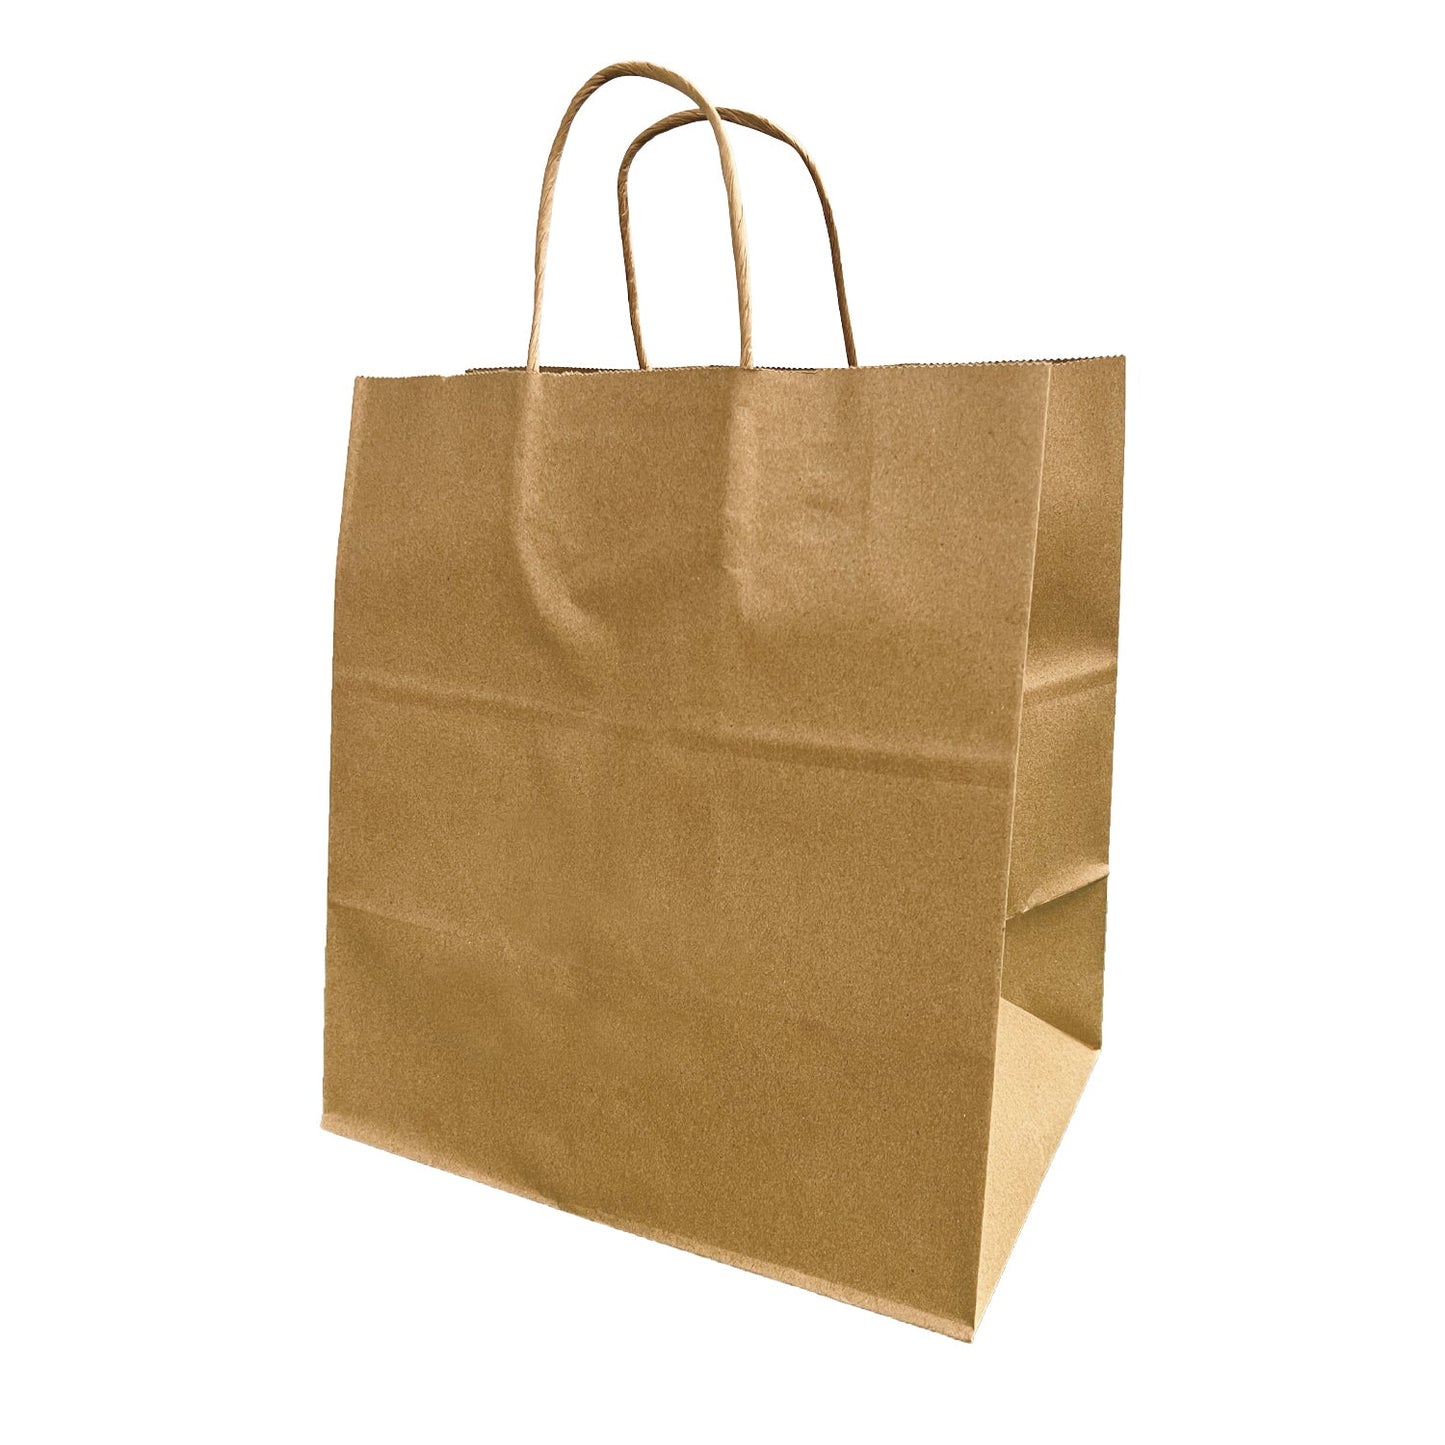 200pcs Bento 11x8x12 inches Kraft Paper Bag Cardboard Insert with Twisted Handles, $0.39/pc